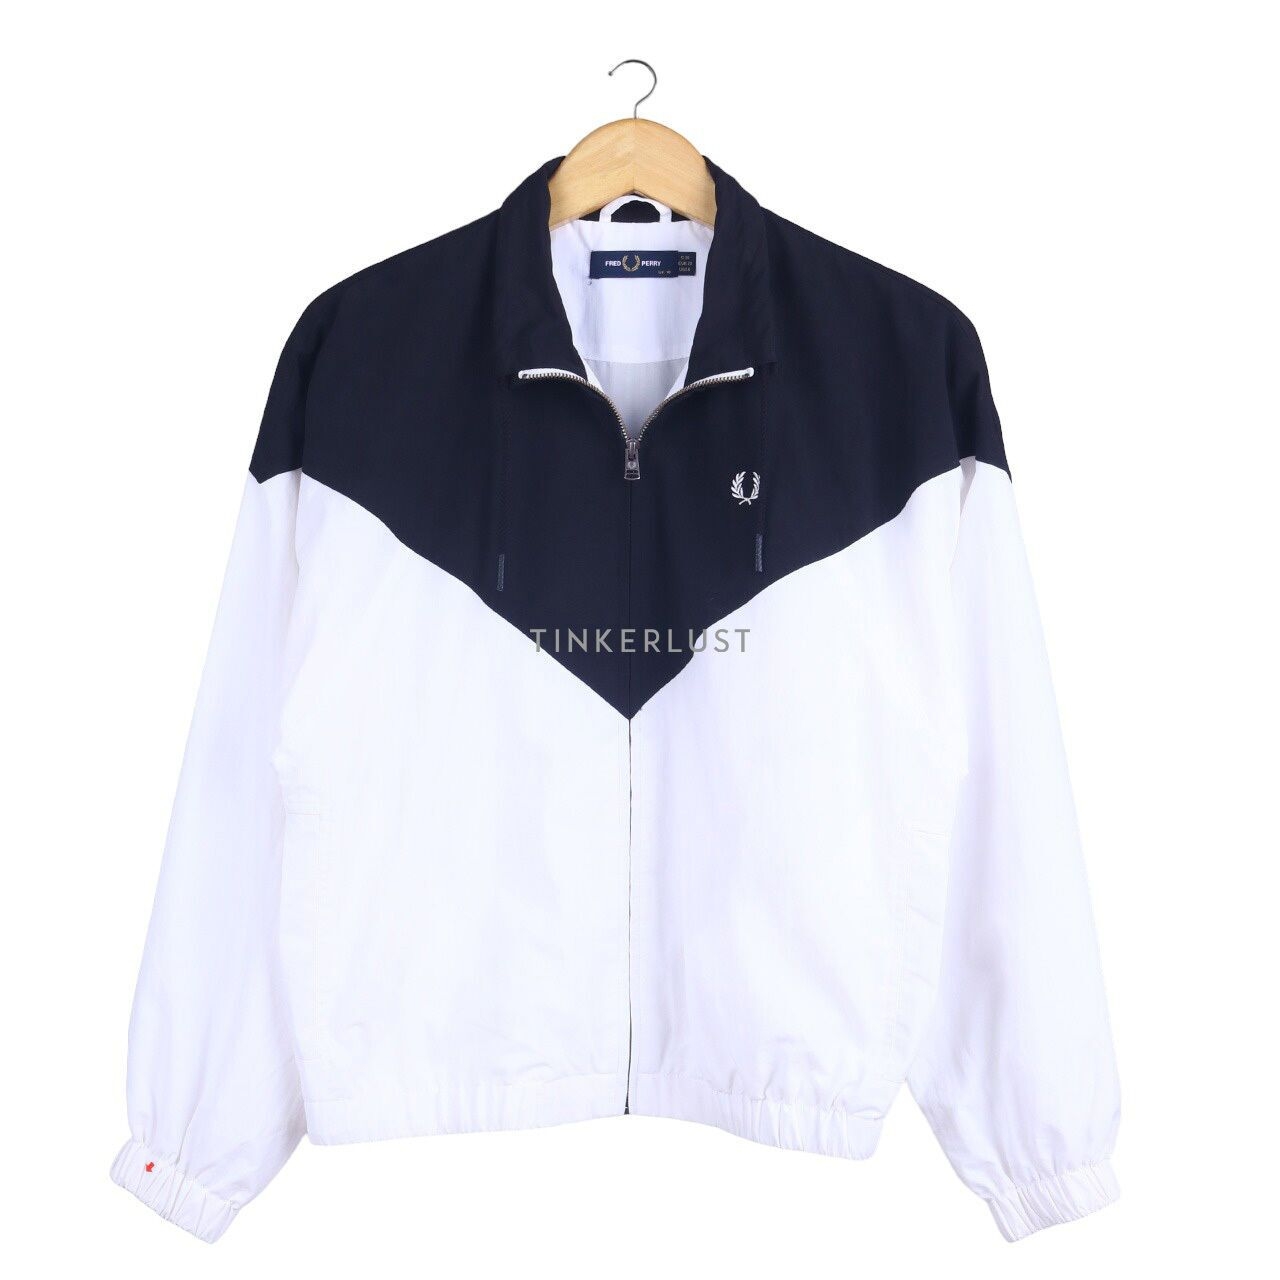 Fred Perry Black & White Jaket